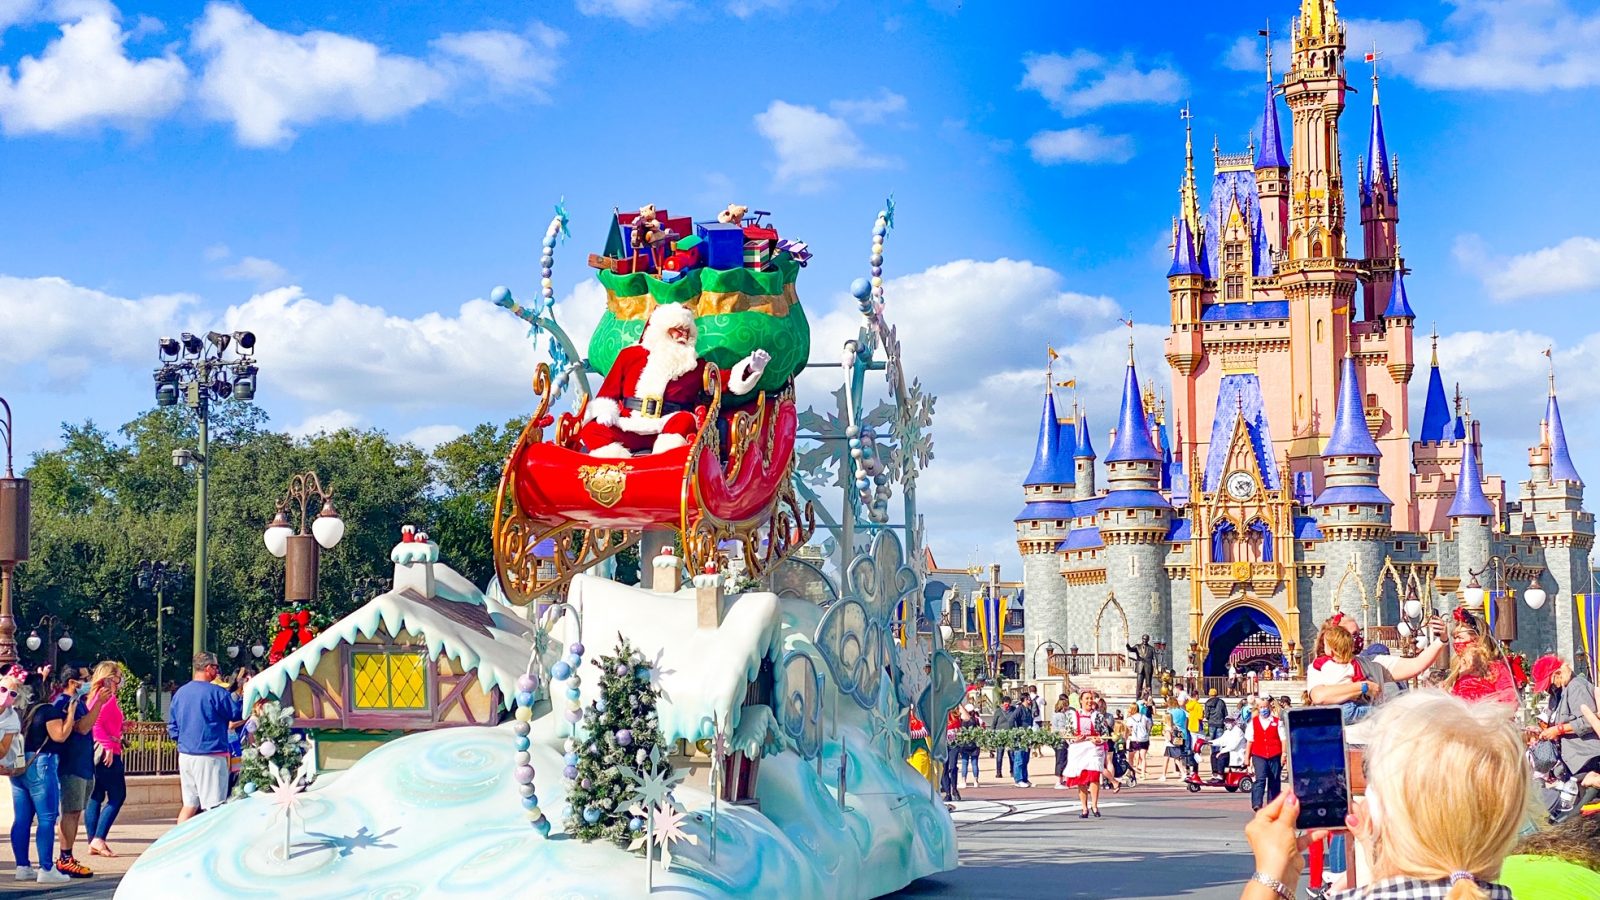 Santa and his sleigh in front of Cinderella's Castle at Disney Christmas 2020